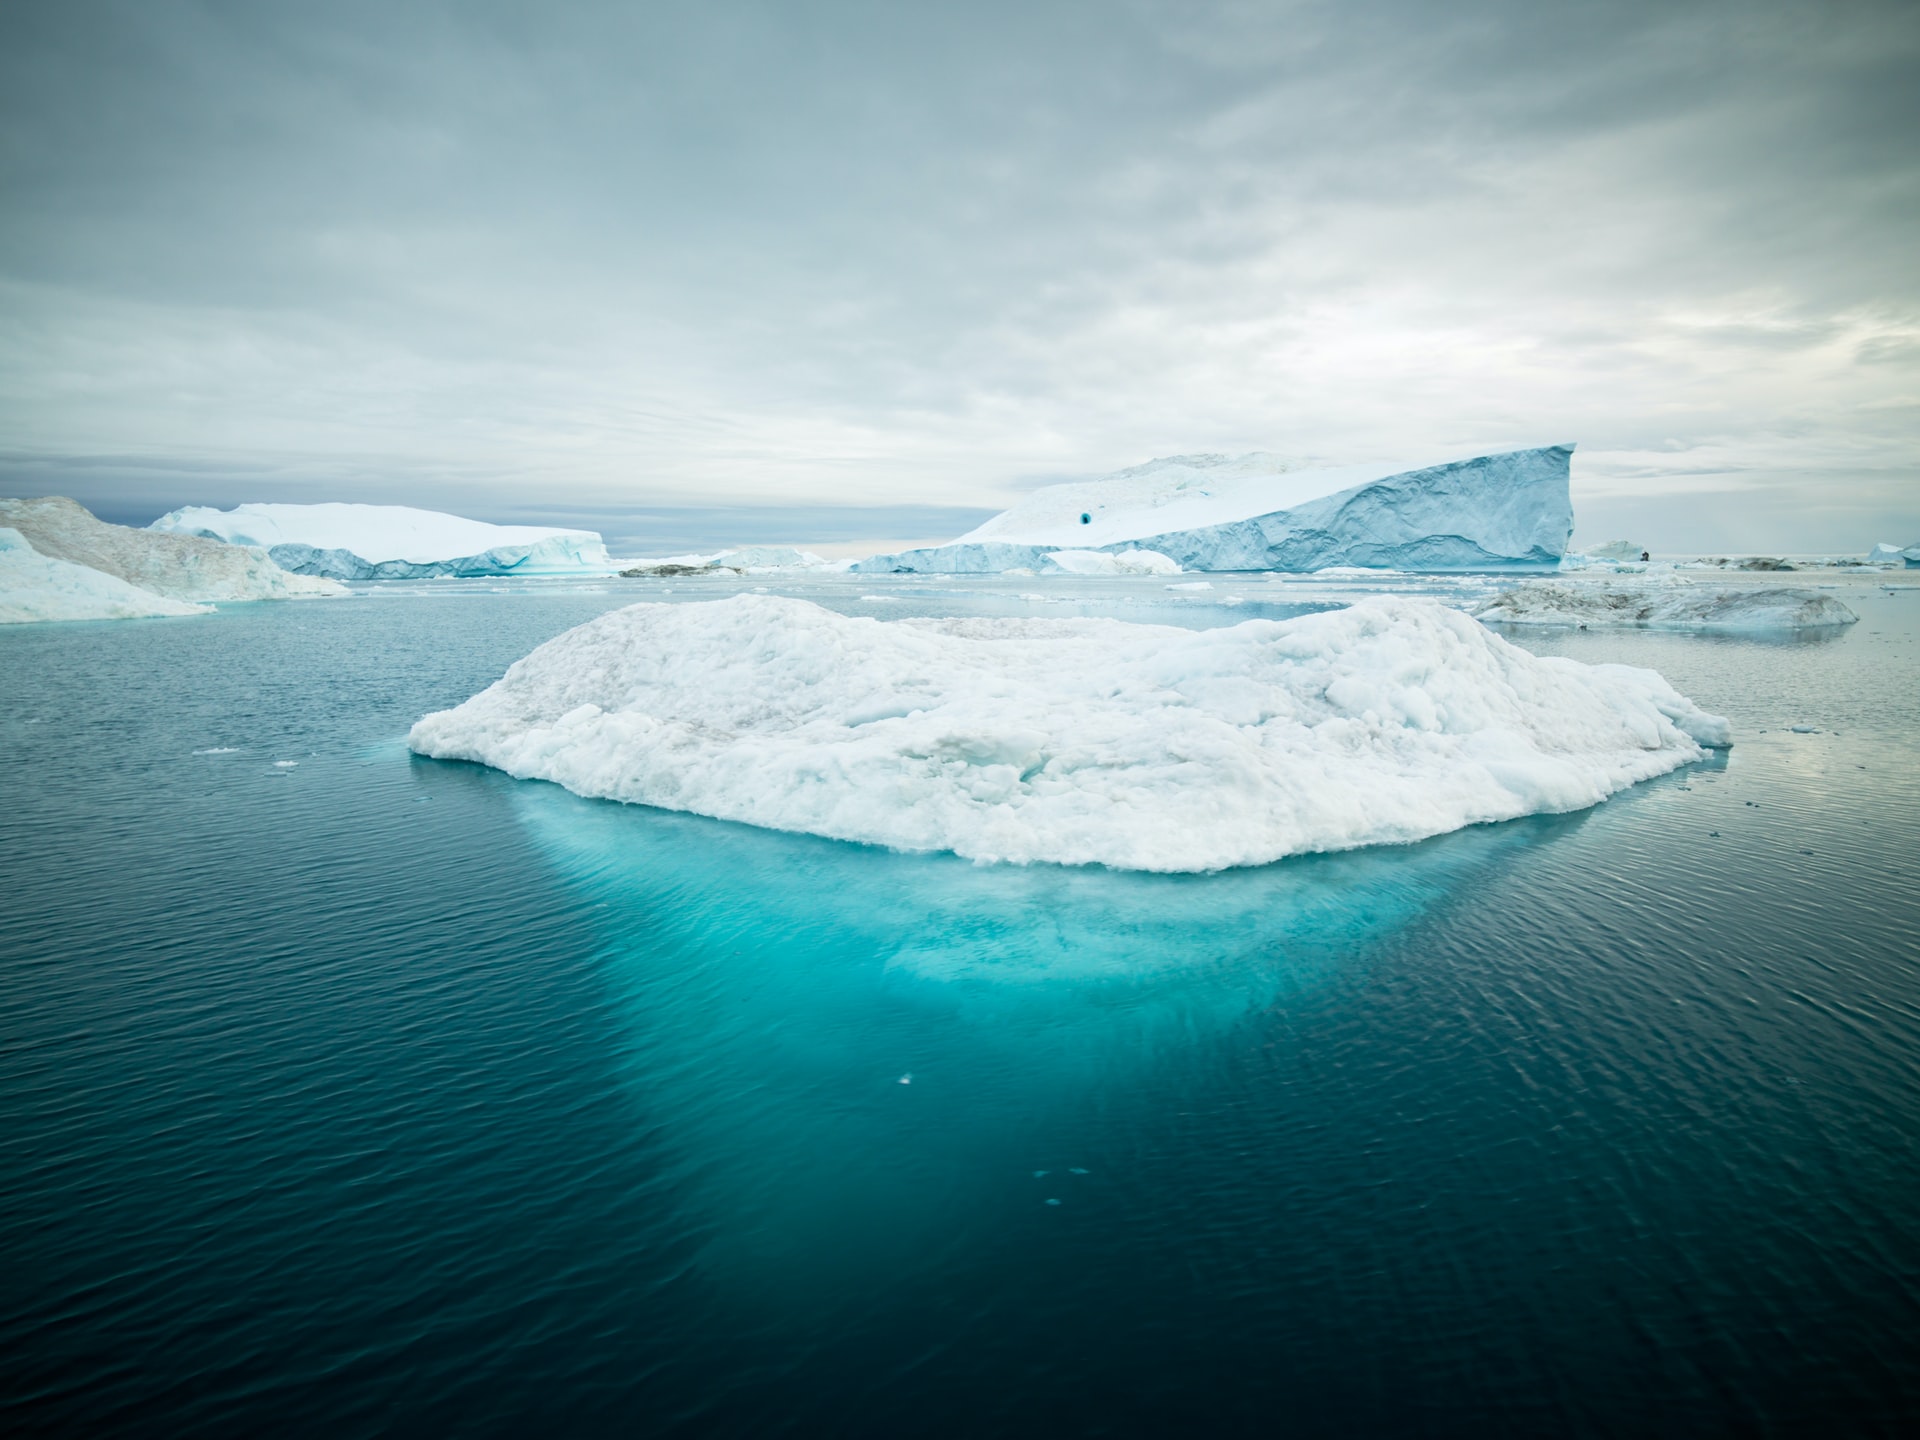 Surviving at the bottom of the iceberg